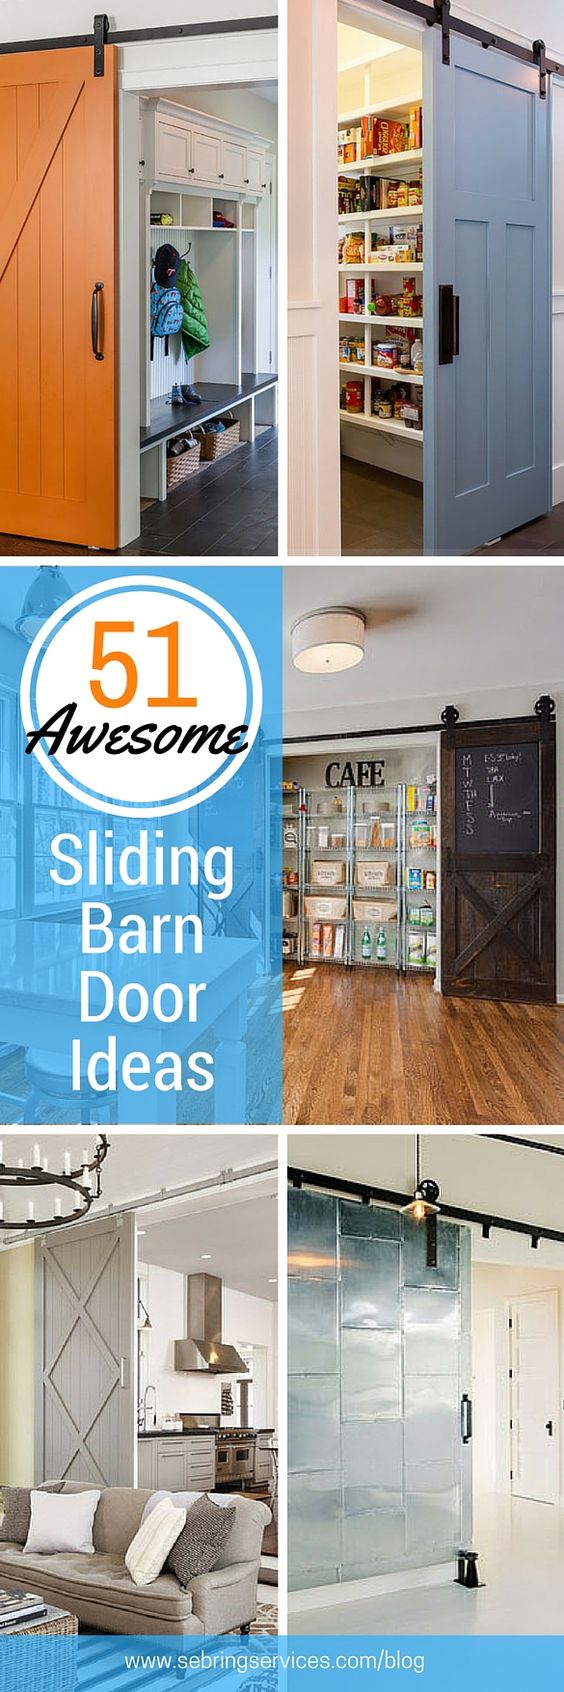 Barn doors are not just for barns anymore. From the countryside barns, these wide sliding doors have entered the house to become popular interior décor pieces. From cozy bedrooms to rustic home offices and perfect room dividers, barn-style doors are all the rage for homeowners.